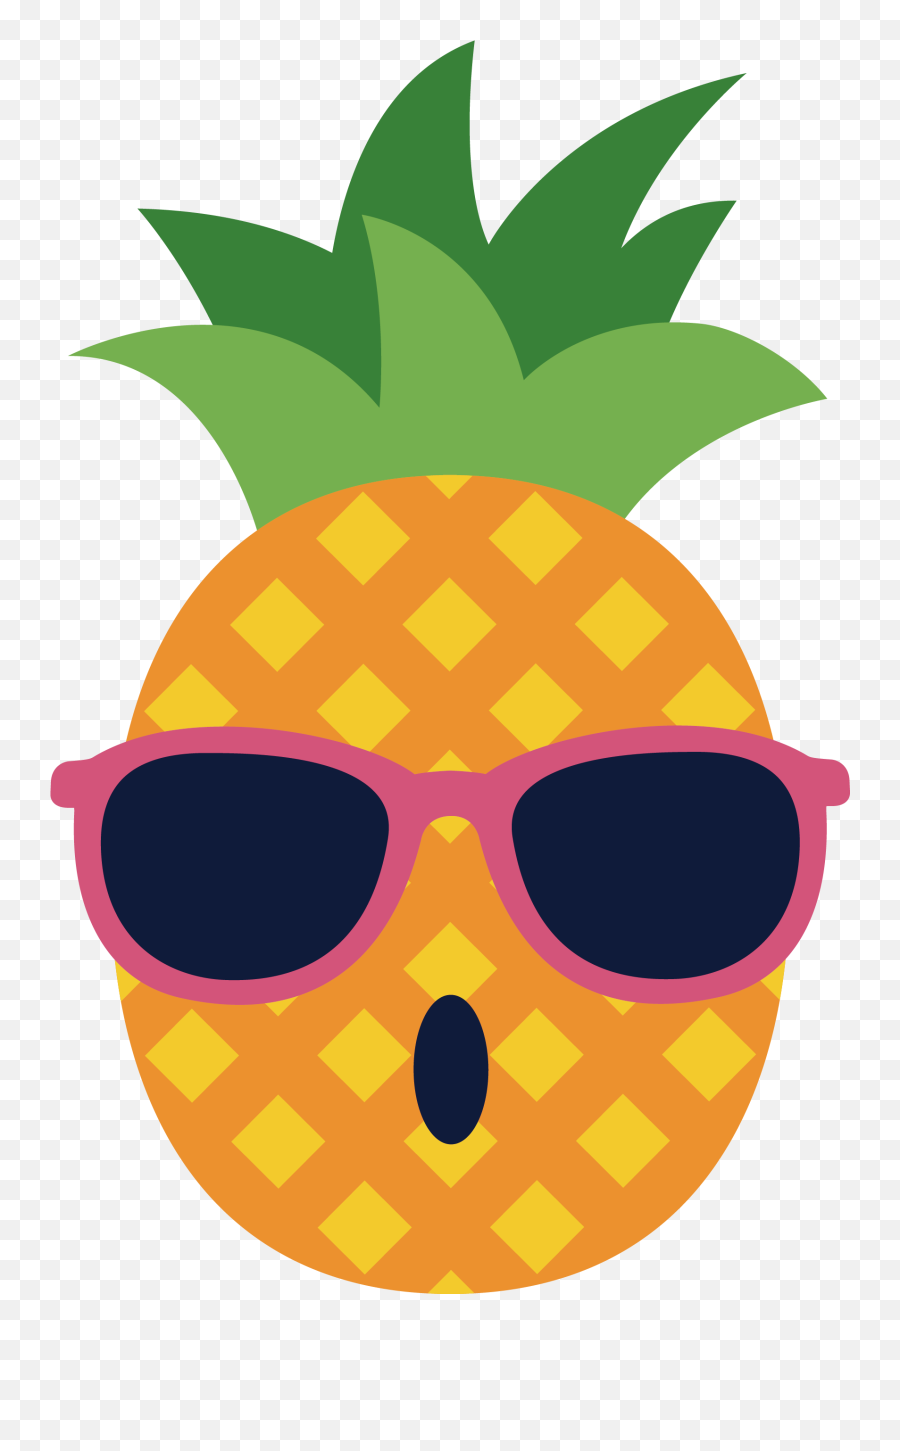 Download Vector Of Spectacles Glasses Pineapple Download - Draw A Pineapple With Sunglasses Emoji,Pineapple Emoticon